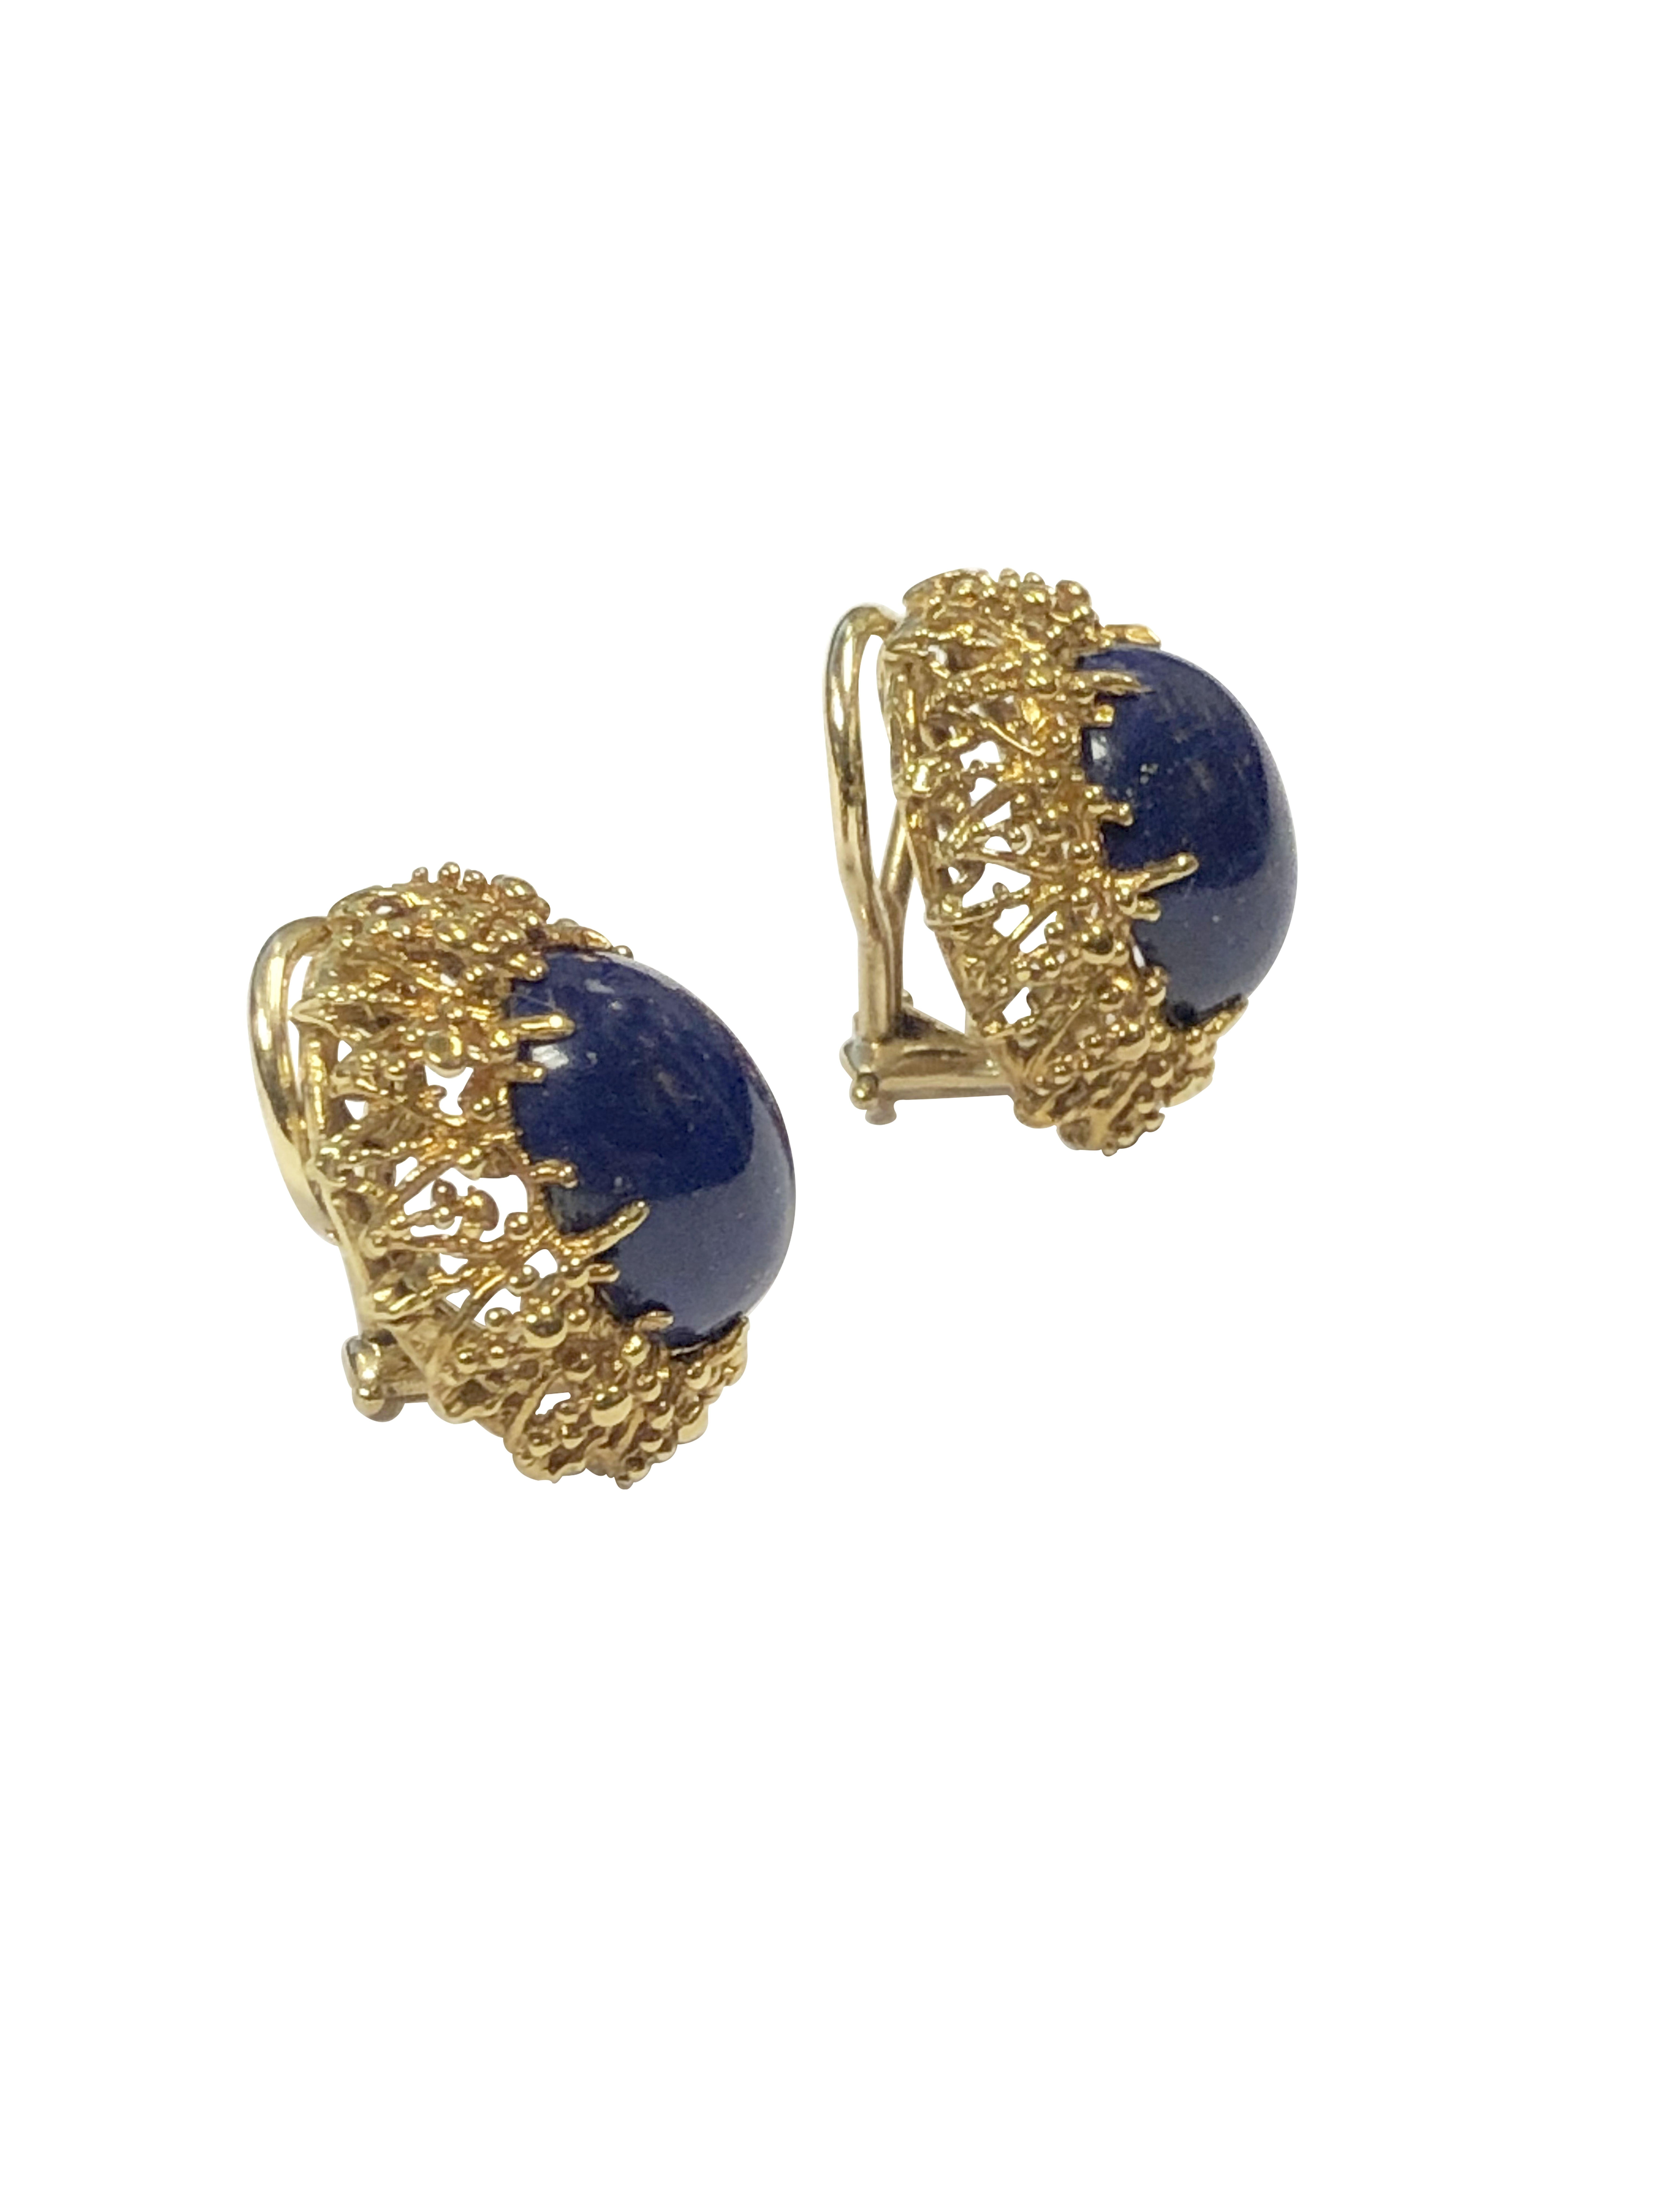 Circa 1990 Tiffany & Company 18K Yellow Gold Earrings,  in a modernist style the Oval earrings measure 3/4 X 3/4 inch and are centrally set with an Oval Lapis Lazulli of Deep Blue color with Gold flecks. Having Omega backs to which a post can be